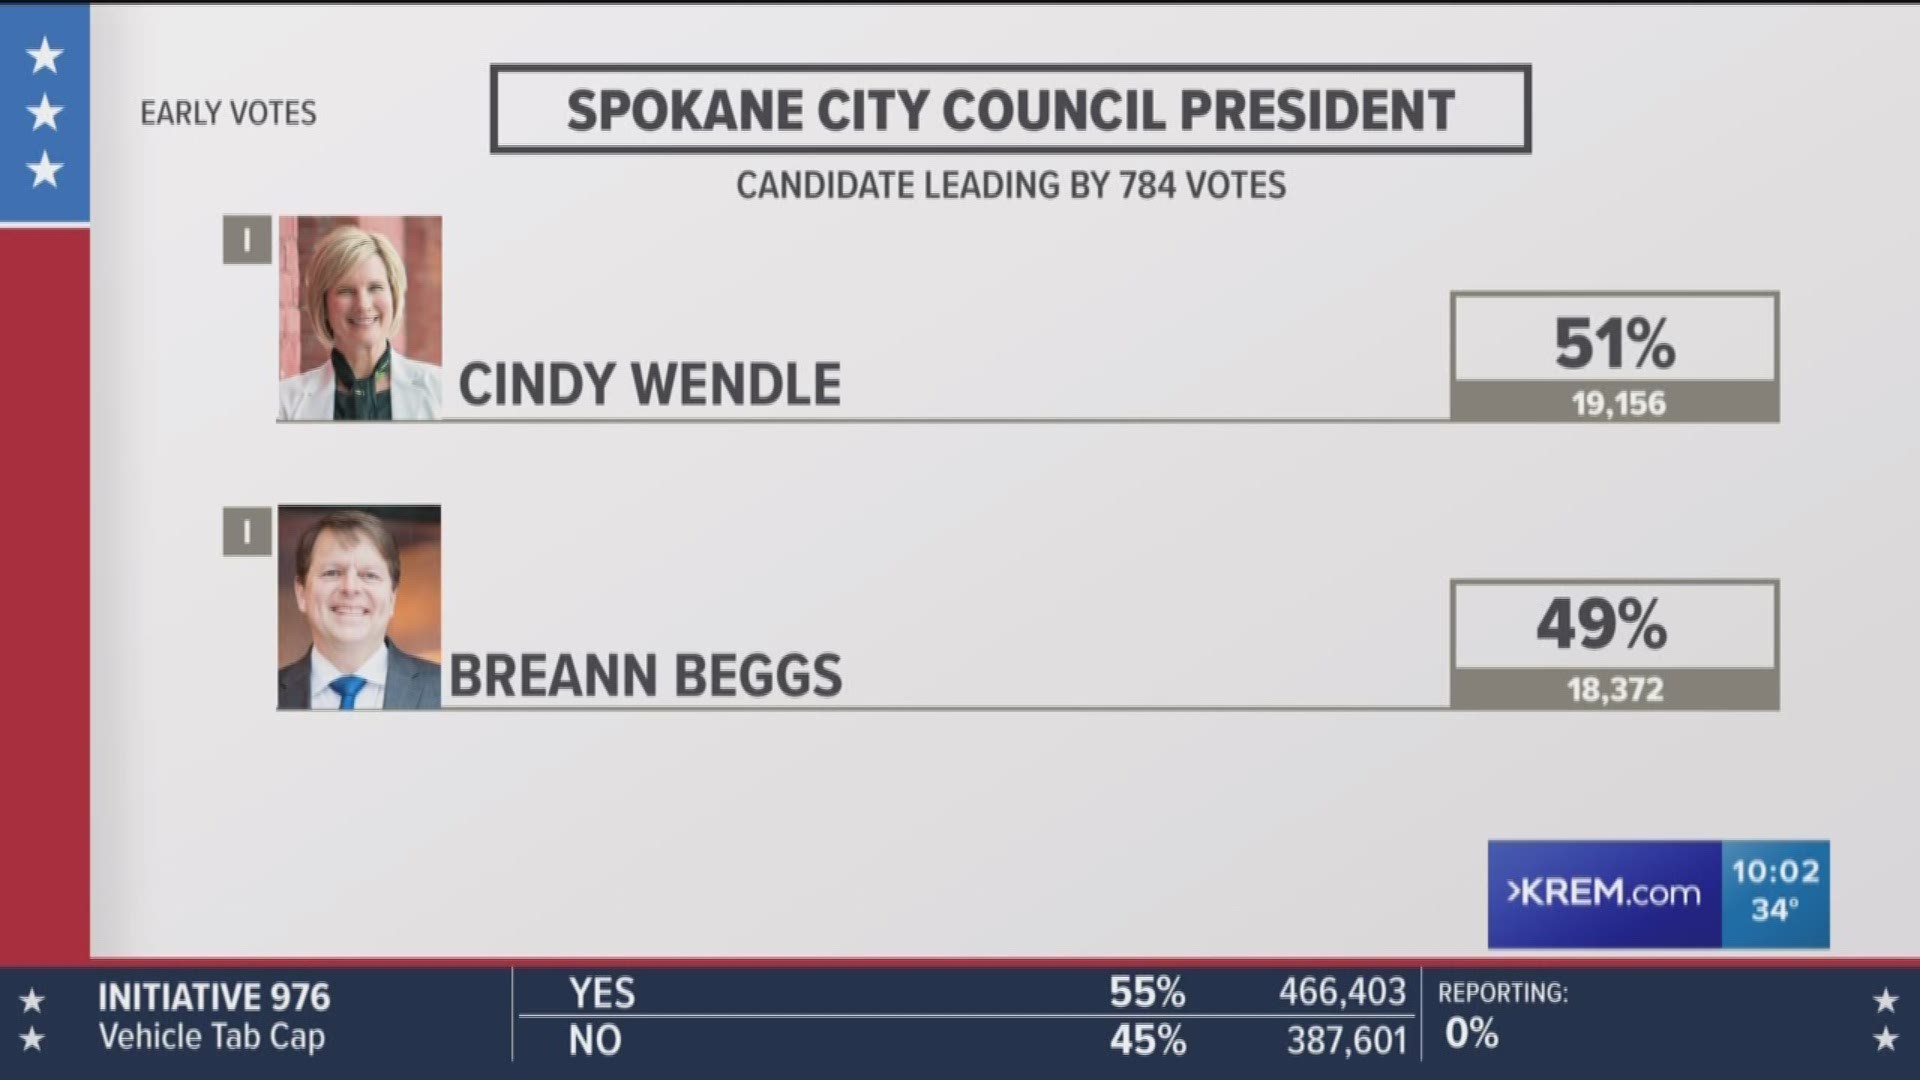 Wendle received 19,156 votes, or 50.83 percent of votes counted so far. Beggs received 18,372 votes, or 48.75 percent, so far. The race is too close to call.